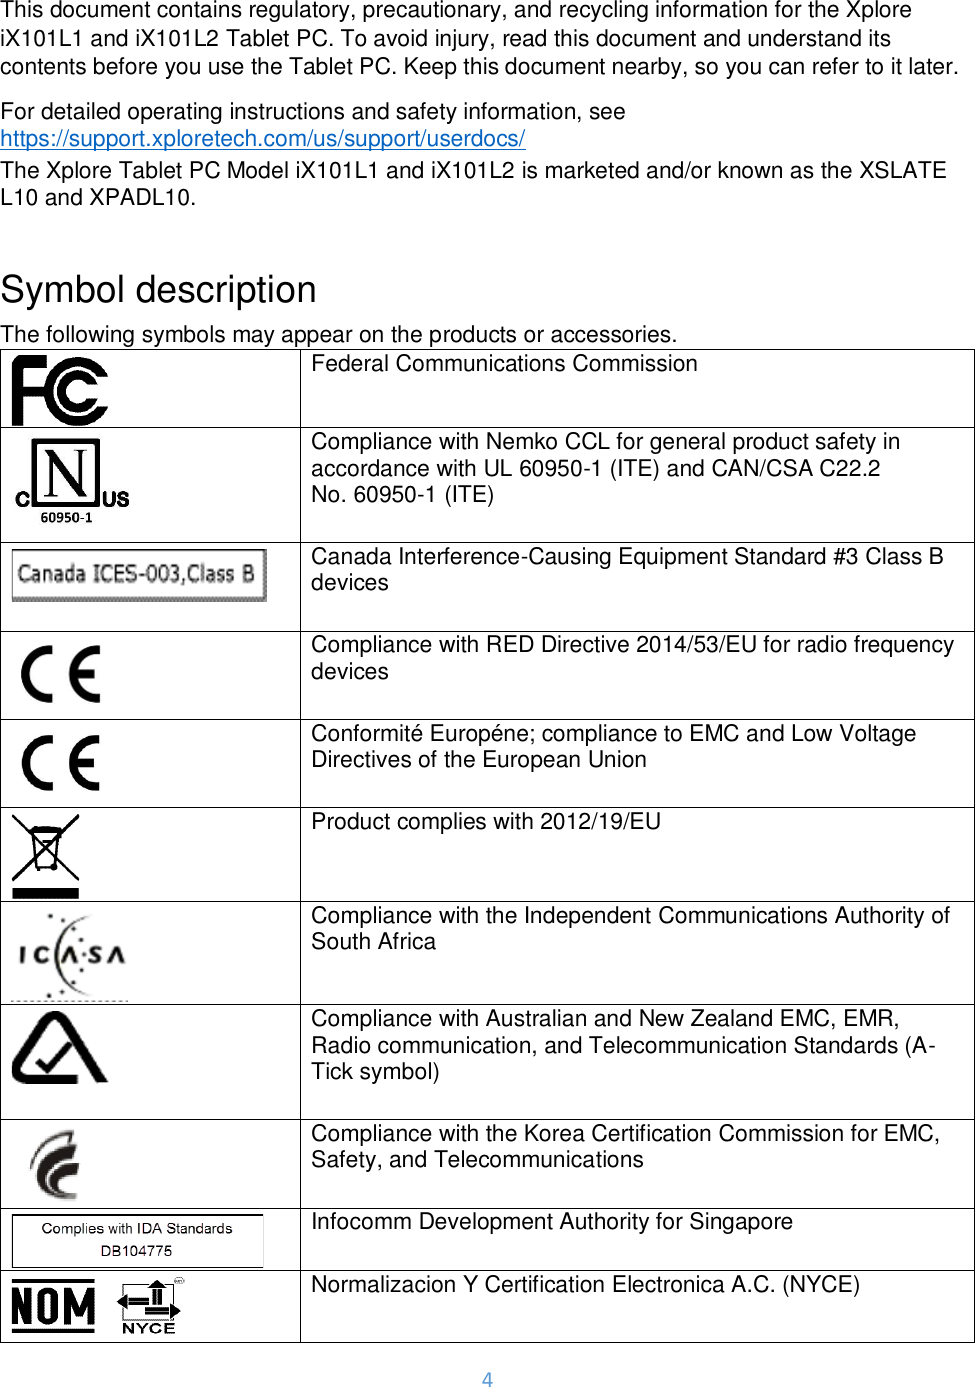 4  This document contains regulatory, precautionary, and recycling information for the Xplore iX101L1 and iX101L2 Tablet PC. To avoid injury, read this document and understand its contents before you use the Tablet PC. Keep this document nearby, so you can refer to it later. For detailed operating instructions and safety information, see  https://support.xploretech.com/us/support/userdocs/ The Xplore Tablet PC Model iX101L1 and iX101L2 is marketed and/or known as the XSLATE L10 and XPADL10.  Symbol description The following symbols may appear on the products or accessories.  Federal Communications Commission   Compliance with Nemko CCL for general product safety in accordance with UL 60950-1 (ITE) and CAN/CSA C22.2 No. 60950-1 (ITE)   Canada Interference-Causing Equipment Standard #3 Class B devices   Compliance with RED Directive 2014/53/EU for radio frequency devices   Conformité Européne; compliance to EMC and Low Voltage Directives of the European Union   Product complies with 2012/19/EU   Compliance with the Independent Communications Authority of South Africa   Compliance with Australian and New Zealand EMC, EMR, Radio communication, and Telecommunication Standards (A-Tick symbol)   Compliance with the Korea Certification Commission for EMC, Safety, and Telecommunications   Infocomm Development Authority for Singapore   Normalizacion Y Certification Electronica A.C. (NYCE)  